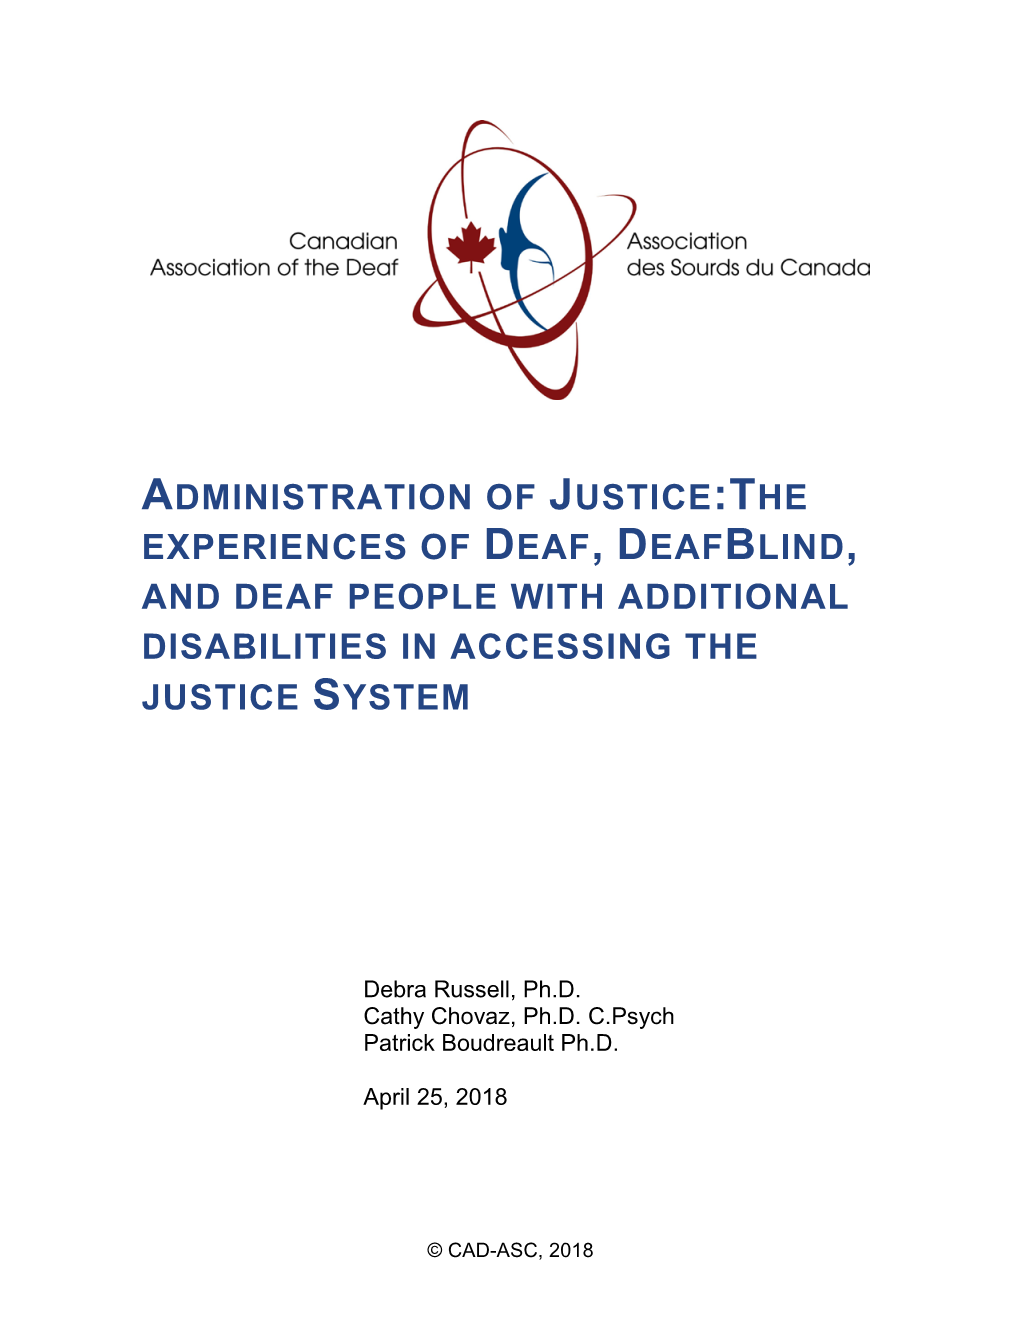 The Experiences of Deaf, Deafblind, and Deaf People with Additional Disabilities in Accessing the Justice System